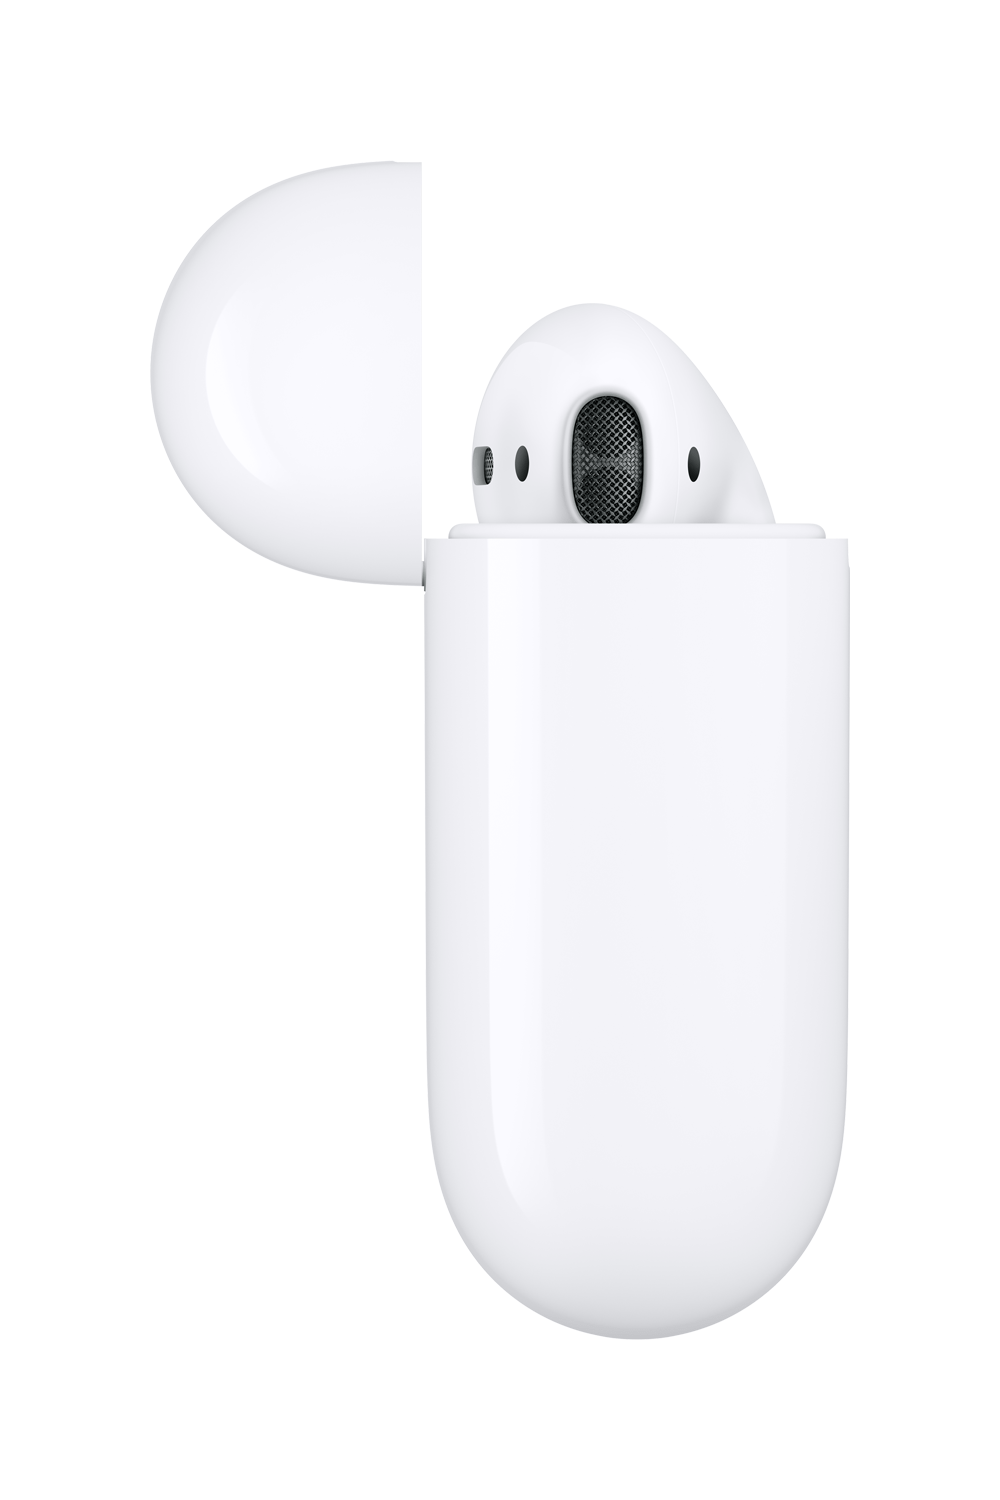 Apple AirPods With Charging Case (2nd Generation) - QuickTech.in